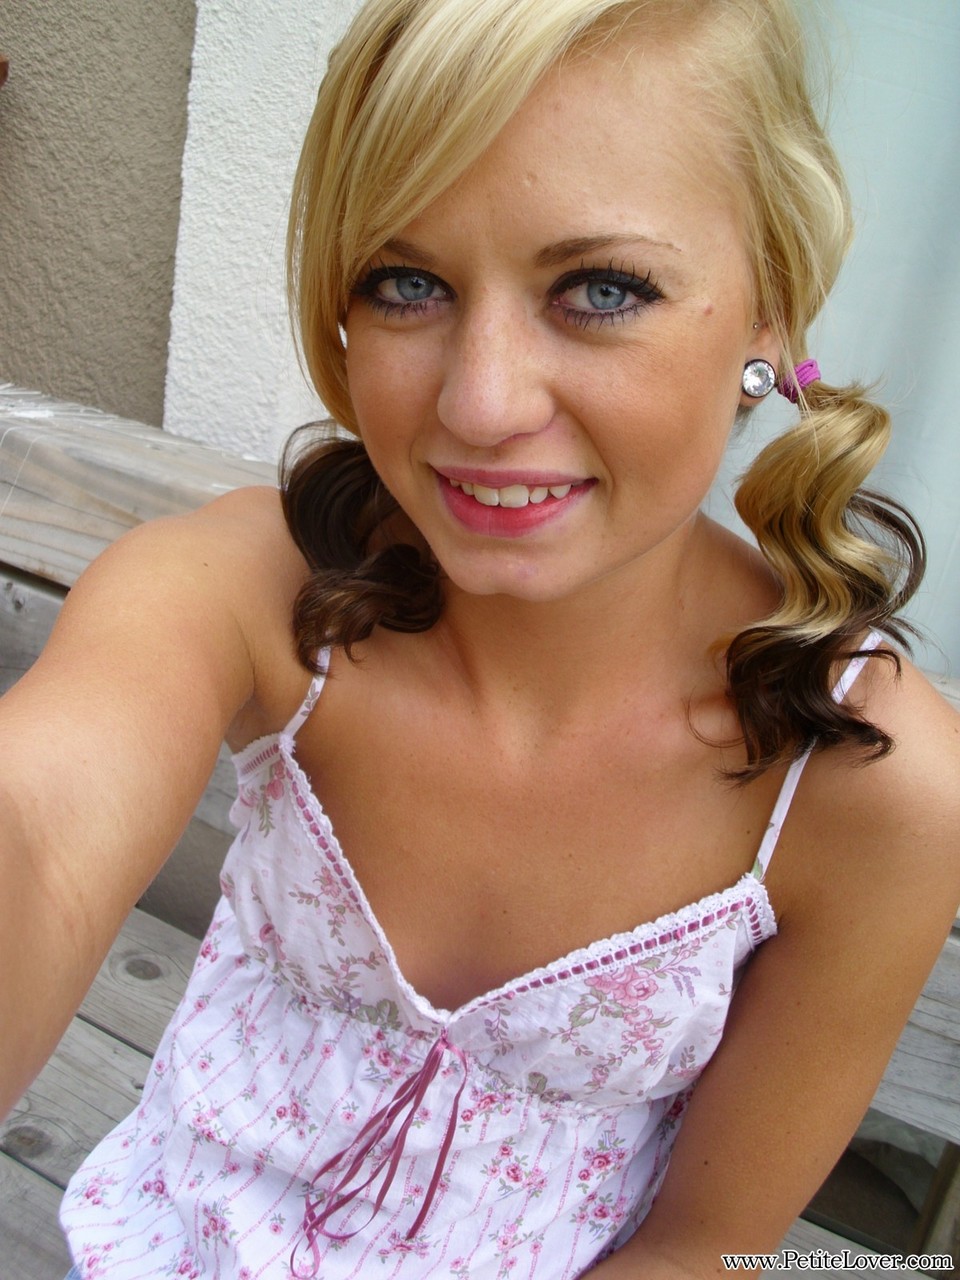 Cute blonde Tiff in pigtails showing off her wee small tits & tiny bald pussy 포르노 사진 #428361803 | Petite Lover Pics, Tiff, Amateur, 모바일 포르노